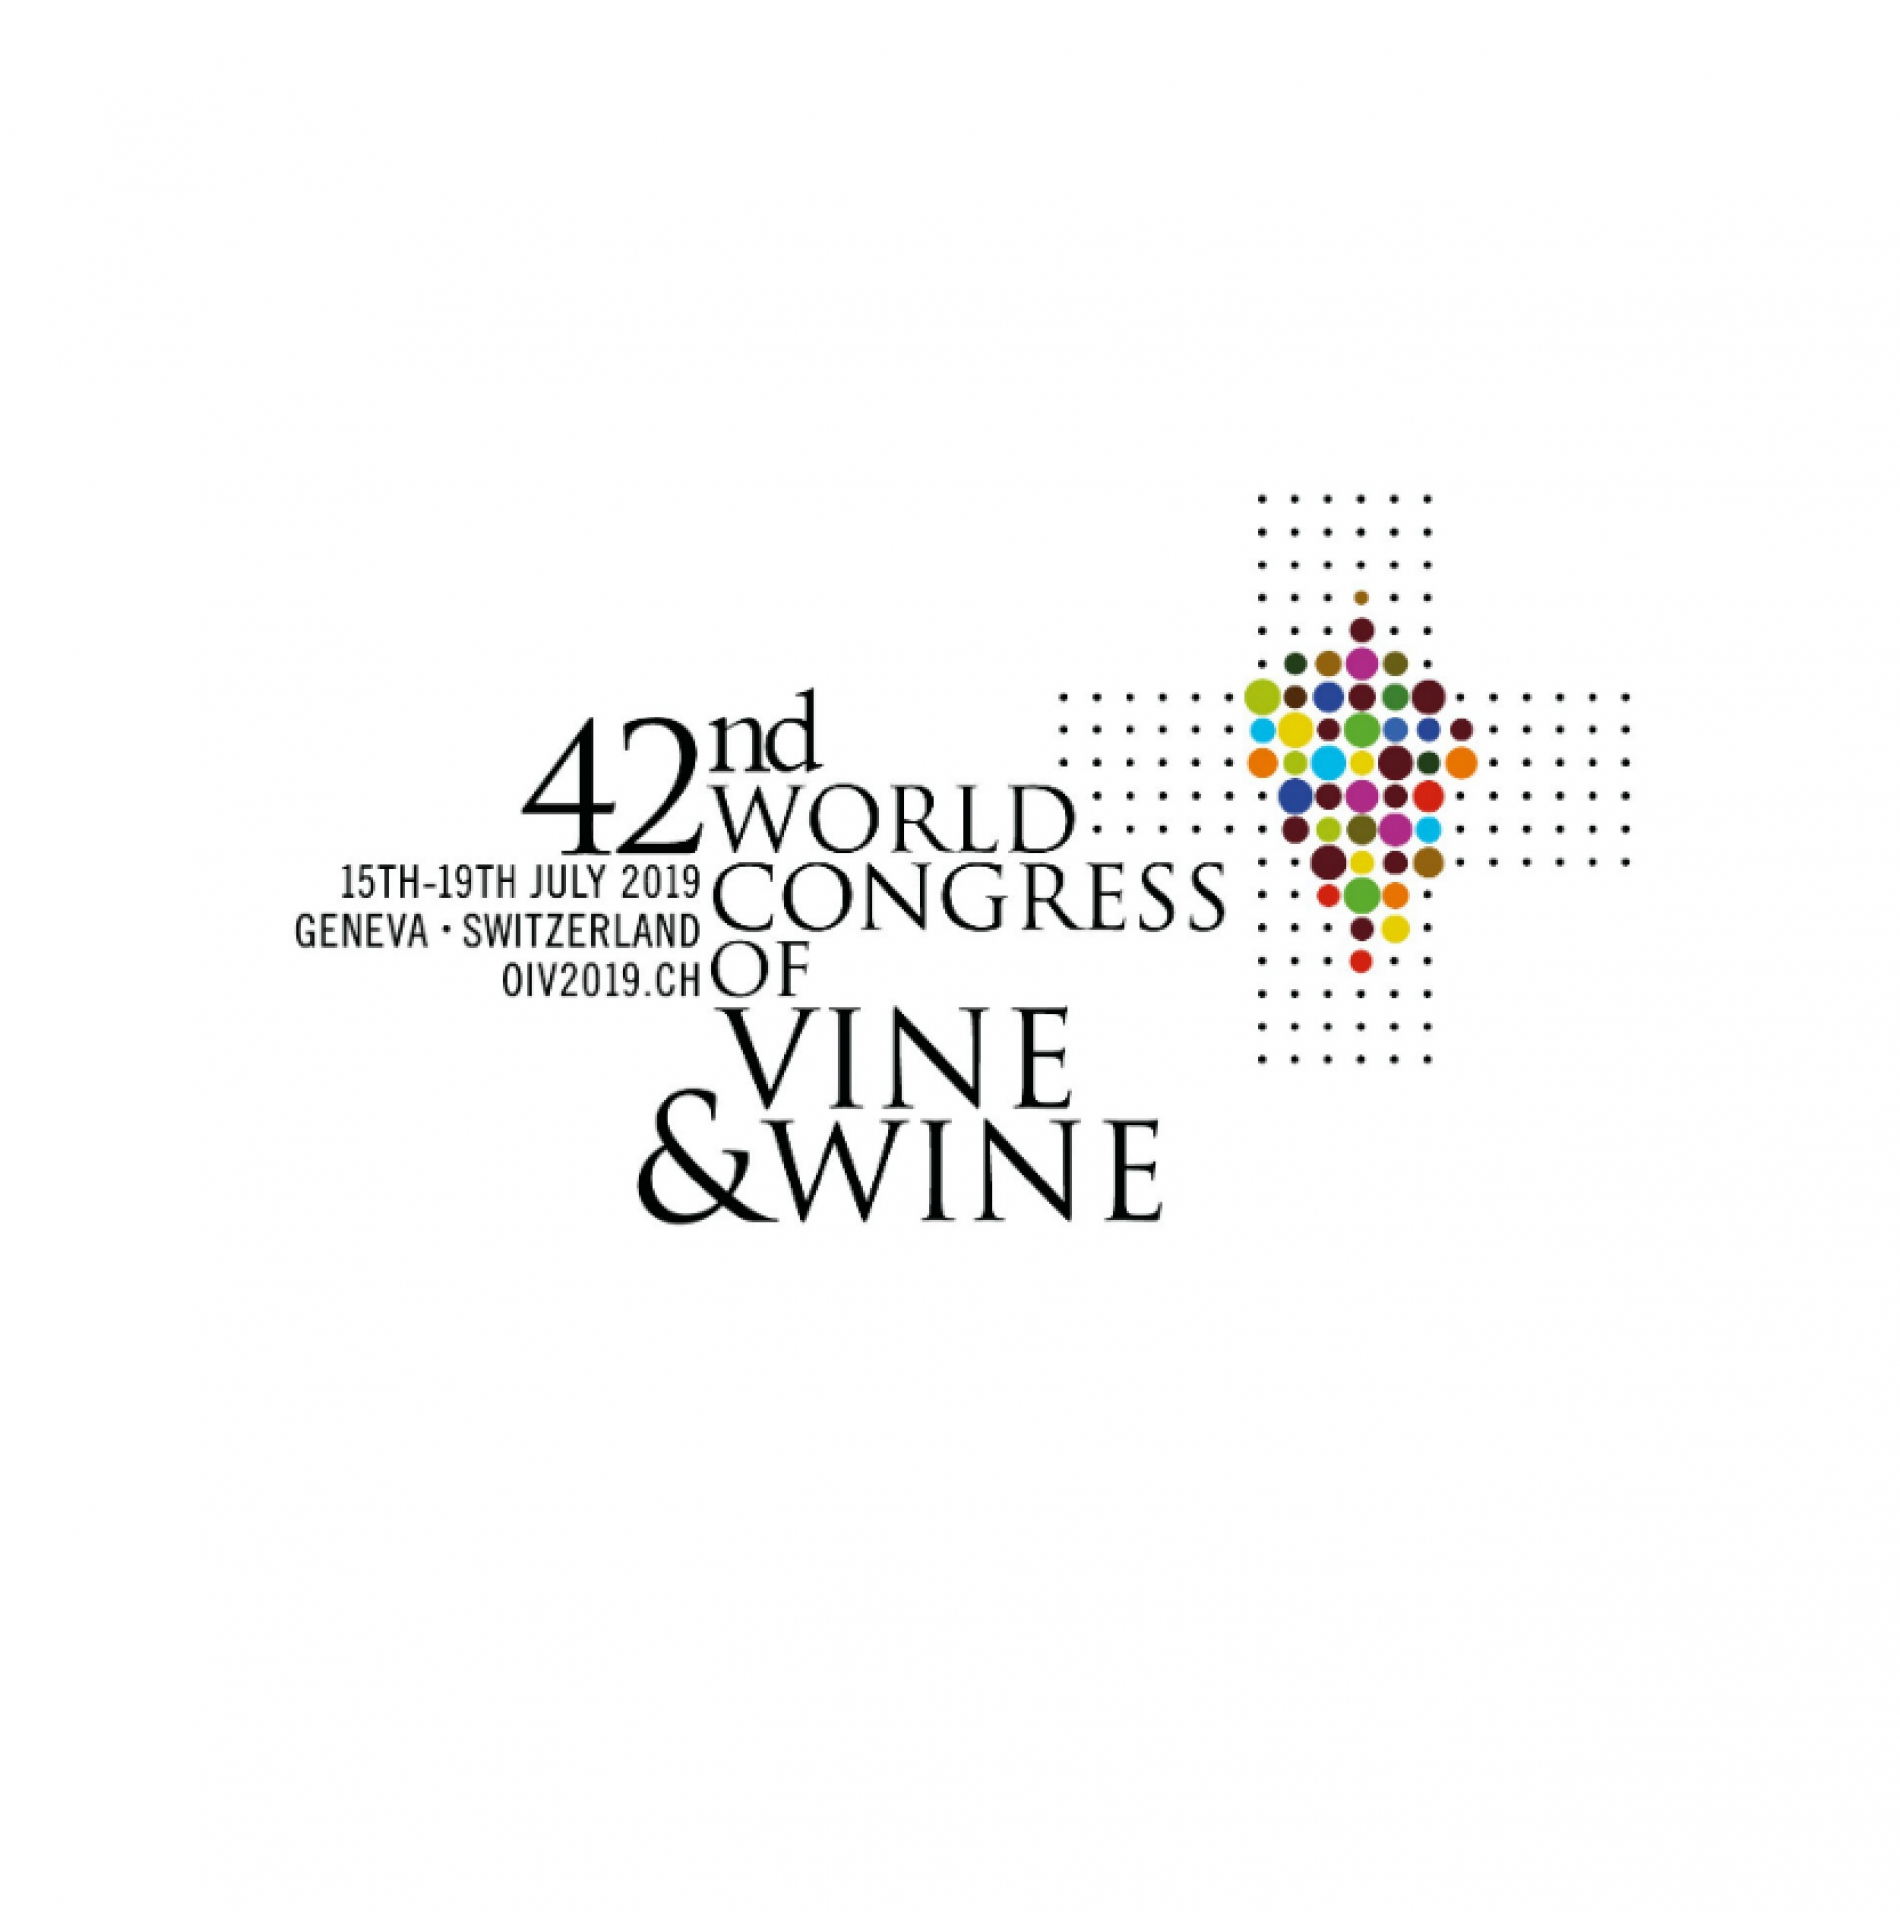 Switzerland: in preparation for the 42nd World Congress of Vine and Wine